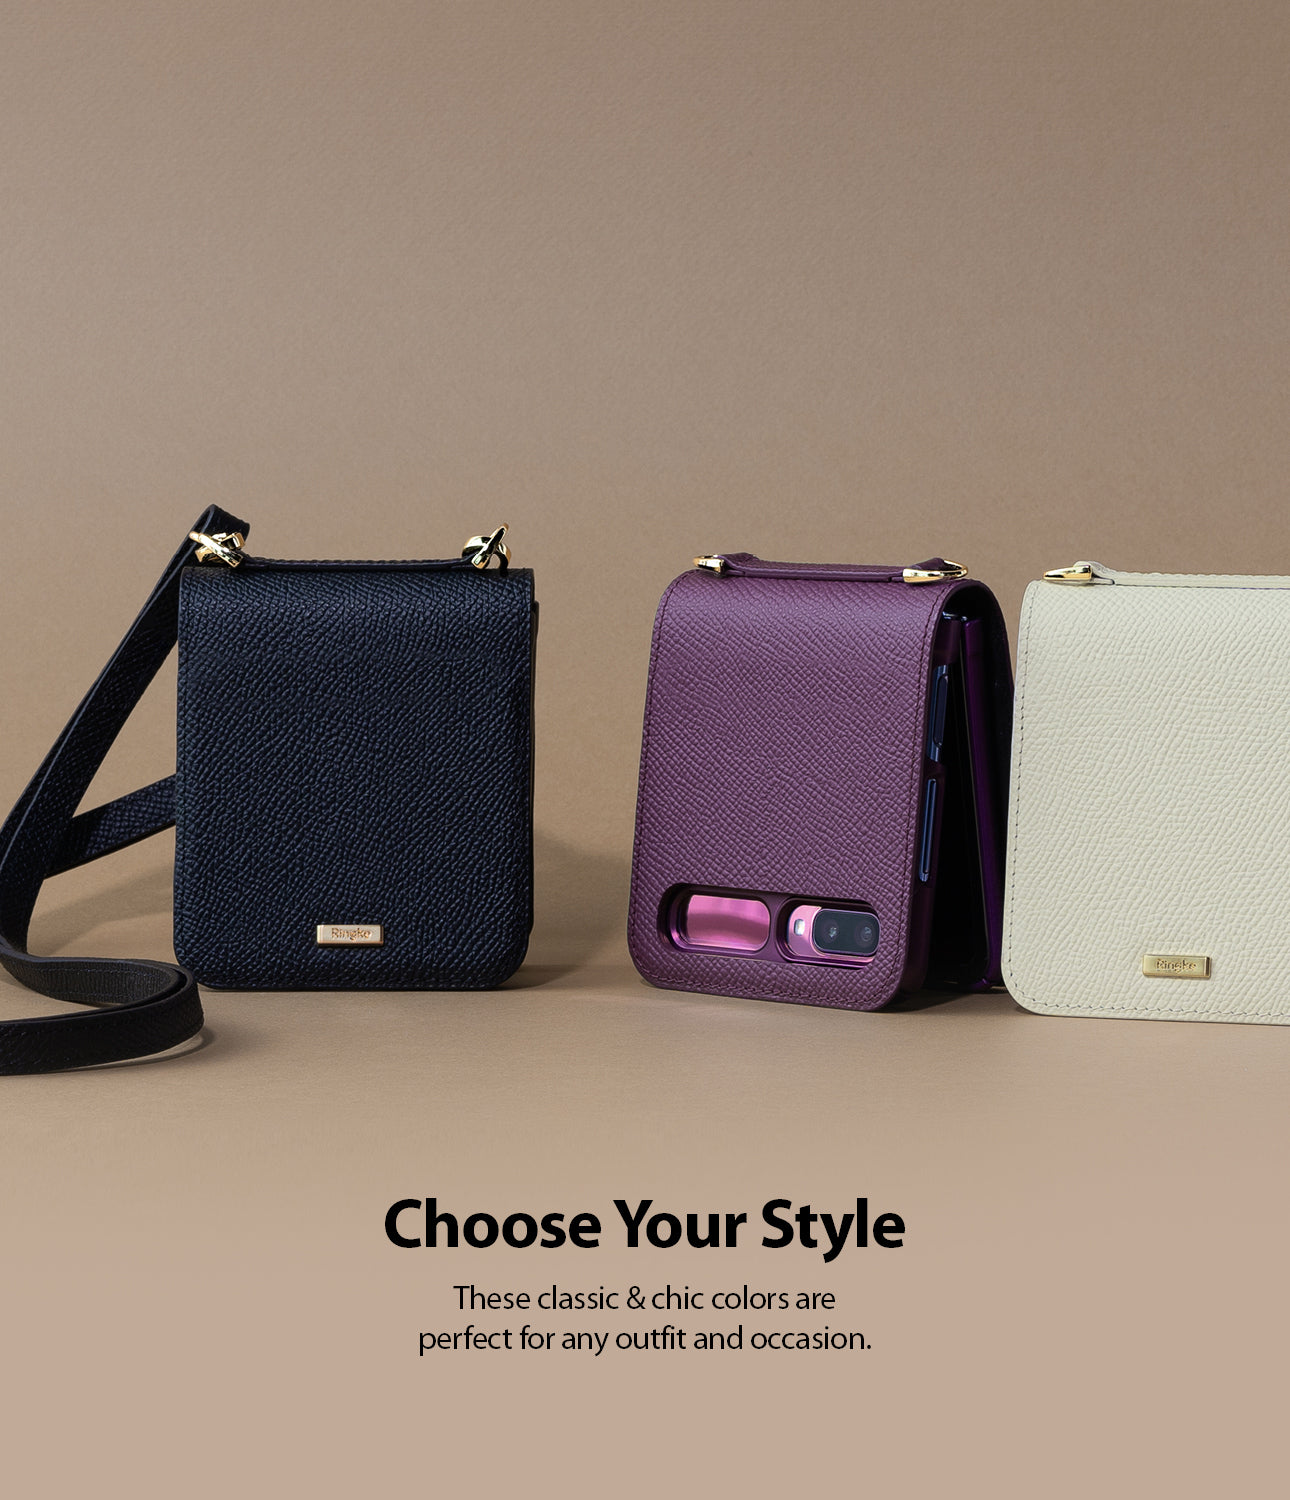 choose your style -  classic and chic colors are perfect for any outfit and occasions